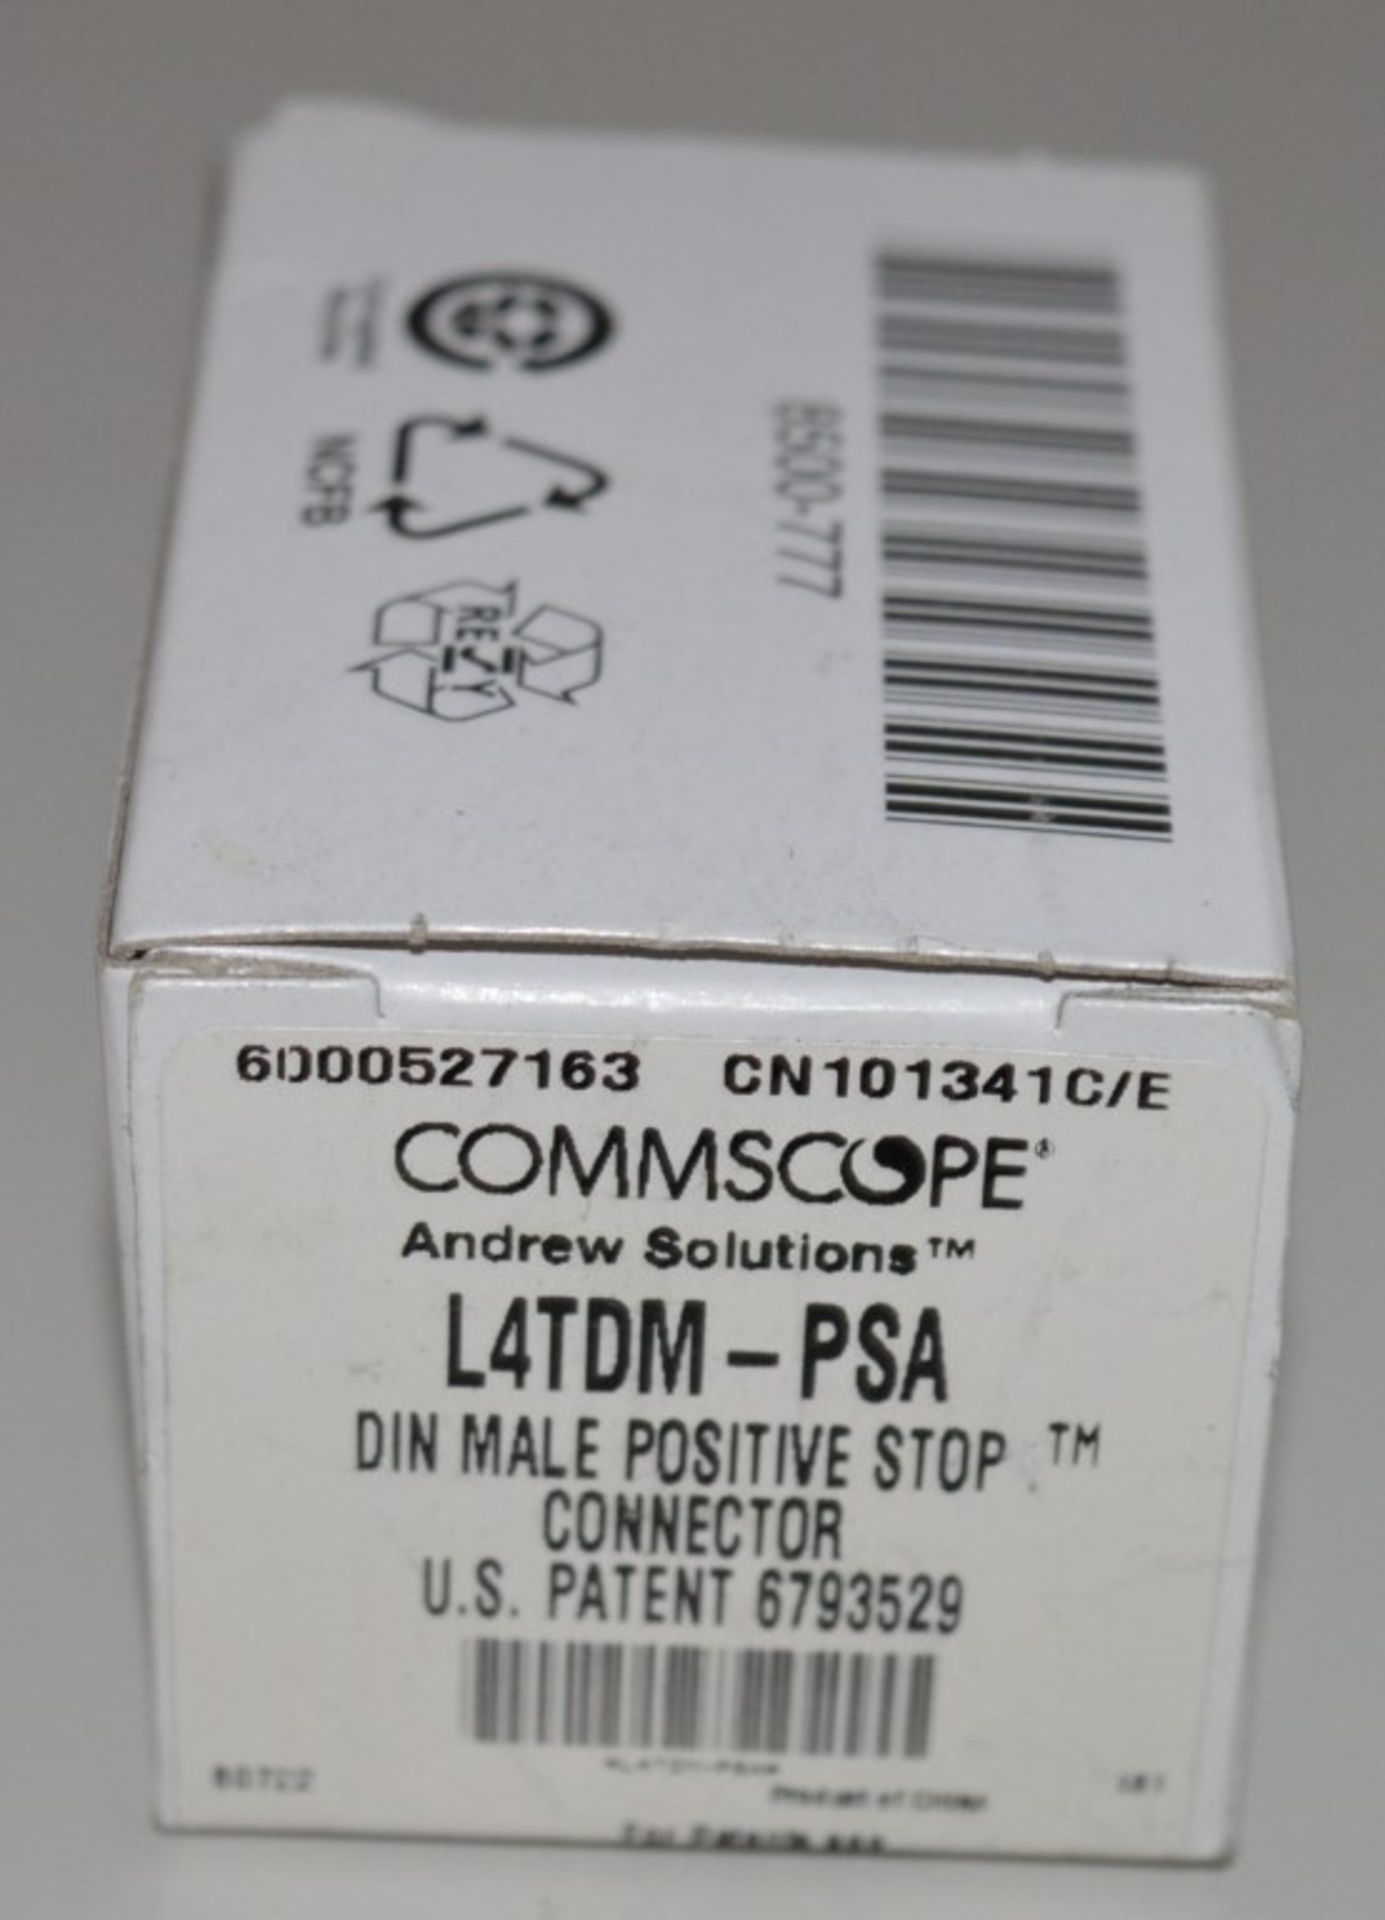 18 x Commscope L4TDM-PSA Din Male Positive Stop Connectors - Andrew Solutions - Brand New Boxed - Image 3 of 8